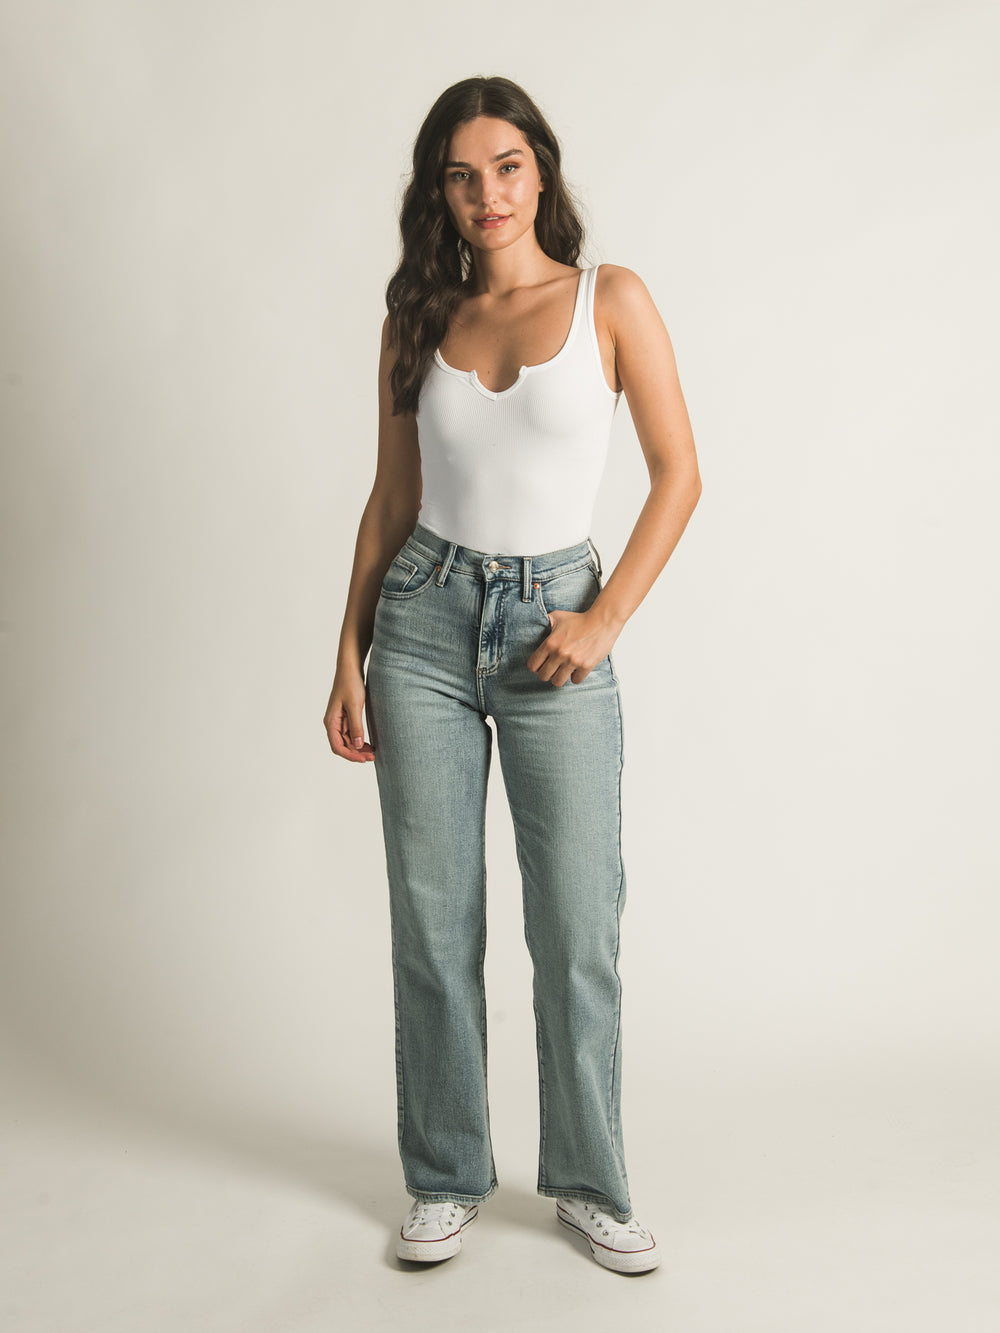 SILVER JEANS 31" HIGH RISE HIGHLY DESIRABLE - CLEARANCE